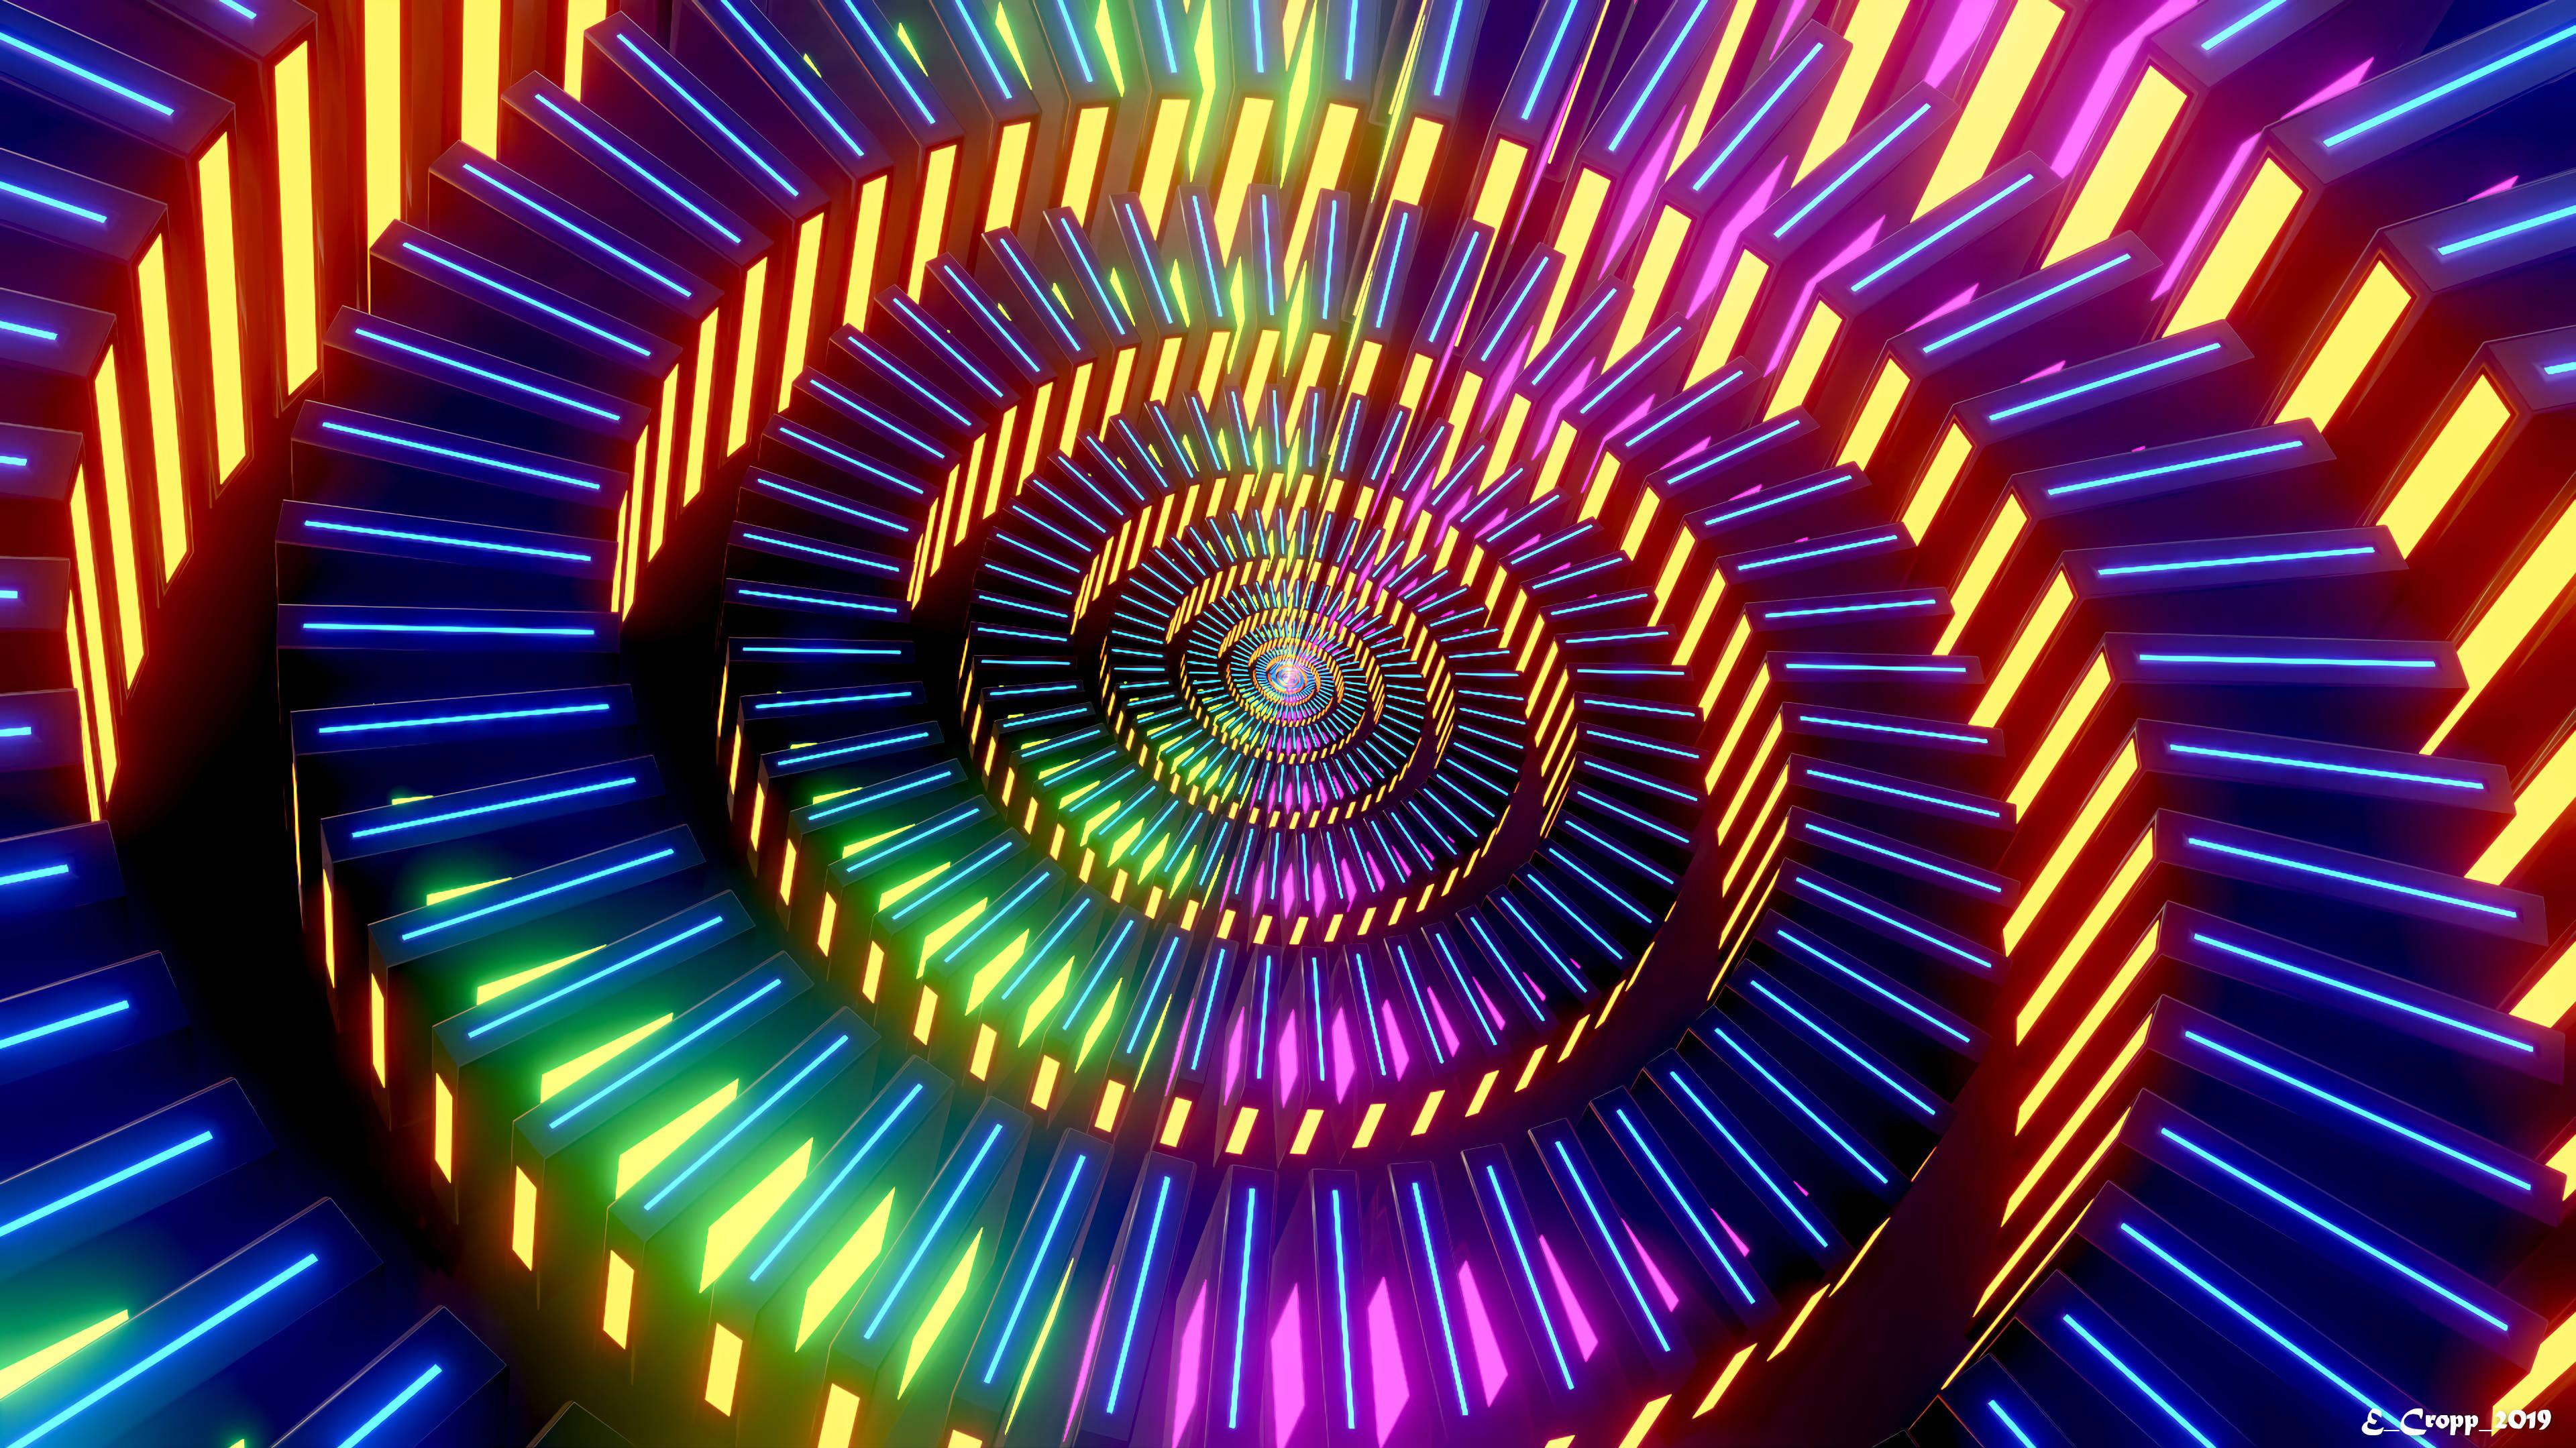 Abstract Glowing Spiral Art Background